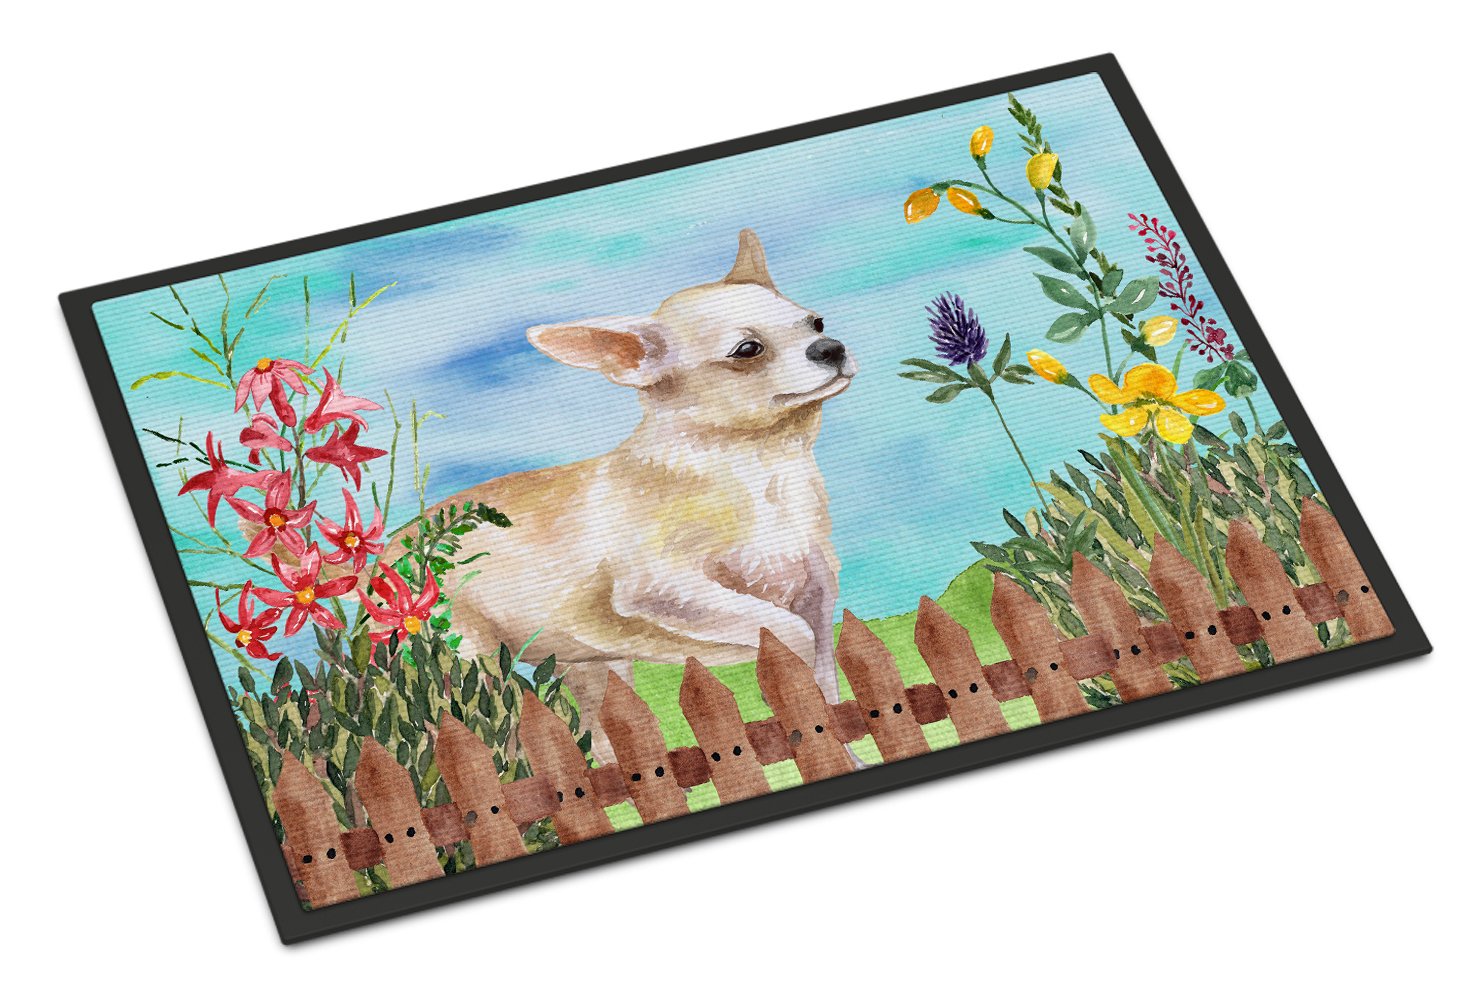 Chihuahua Leg up Spring Indoor or Outdoor Mat 24x36 CK1259JMAT by Caroline's Treasures